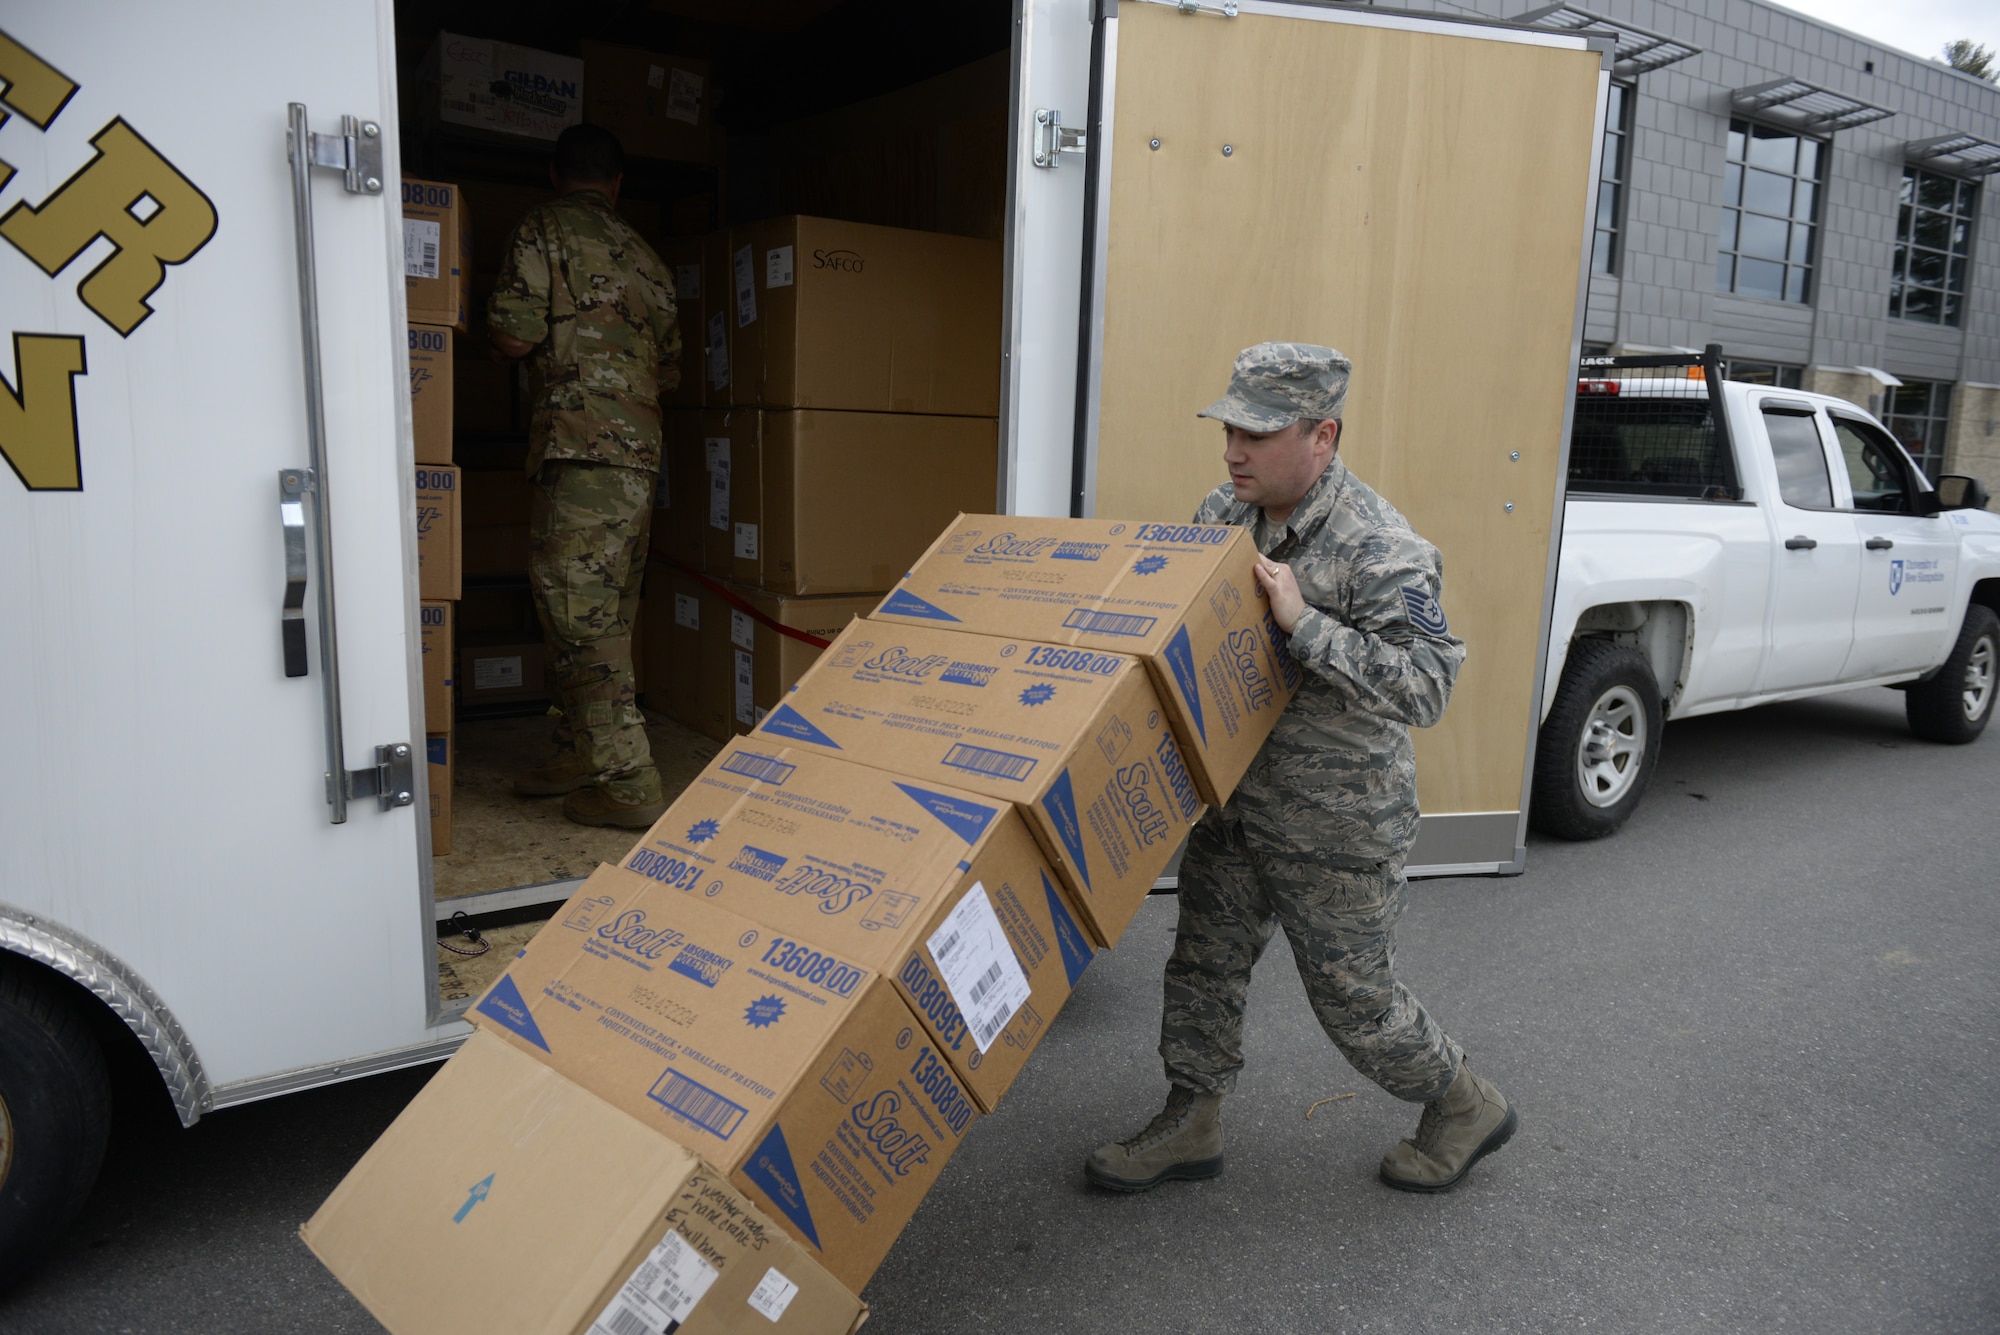 Tech. Sgt. Lance Whitehill, 157th Civil Engineers Squadron, New Hampshire Air National Guard, offloads supplies at the Hamel Recreation Center, University of New Hampshire, March 25, 2020. The facility will augment area hospitals treating COVID-19 cases, if necessary. It is one of nine the NHNG plans to set up and manage across the state. (U.S. Air National Guard photo by Tech. Sgt. Aaron Vezeau)